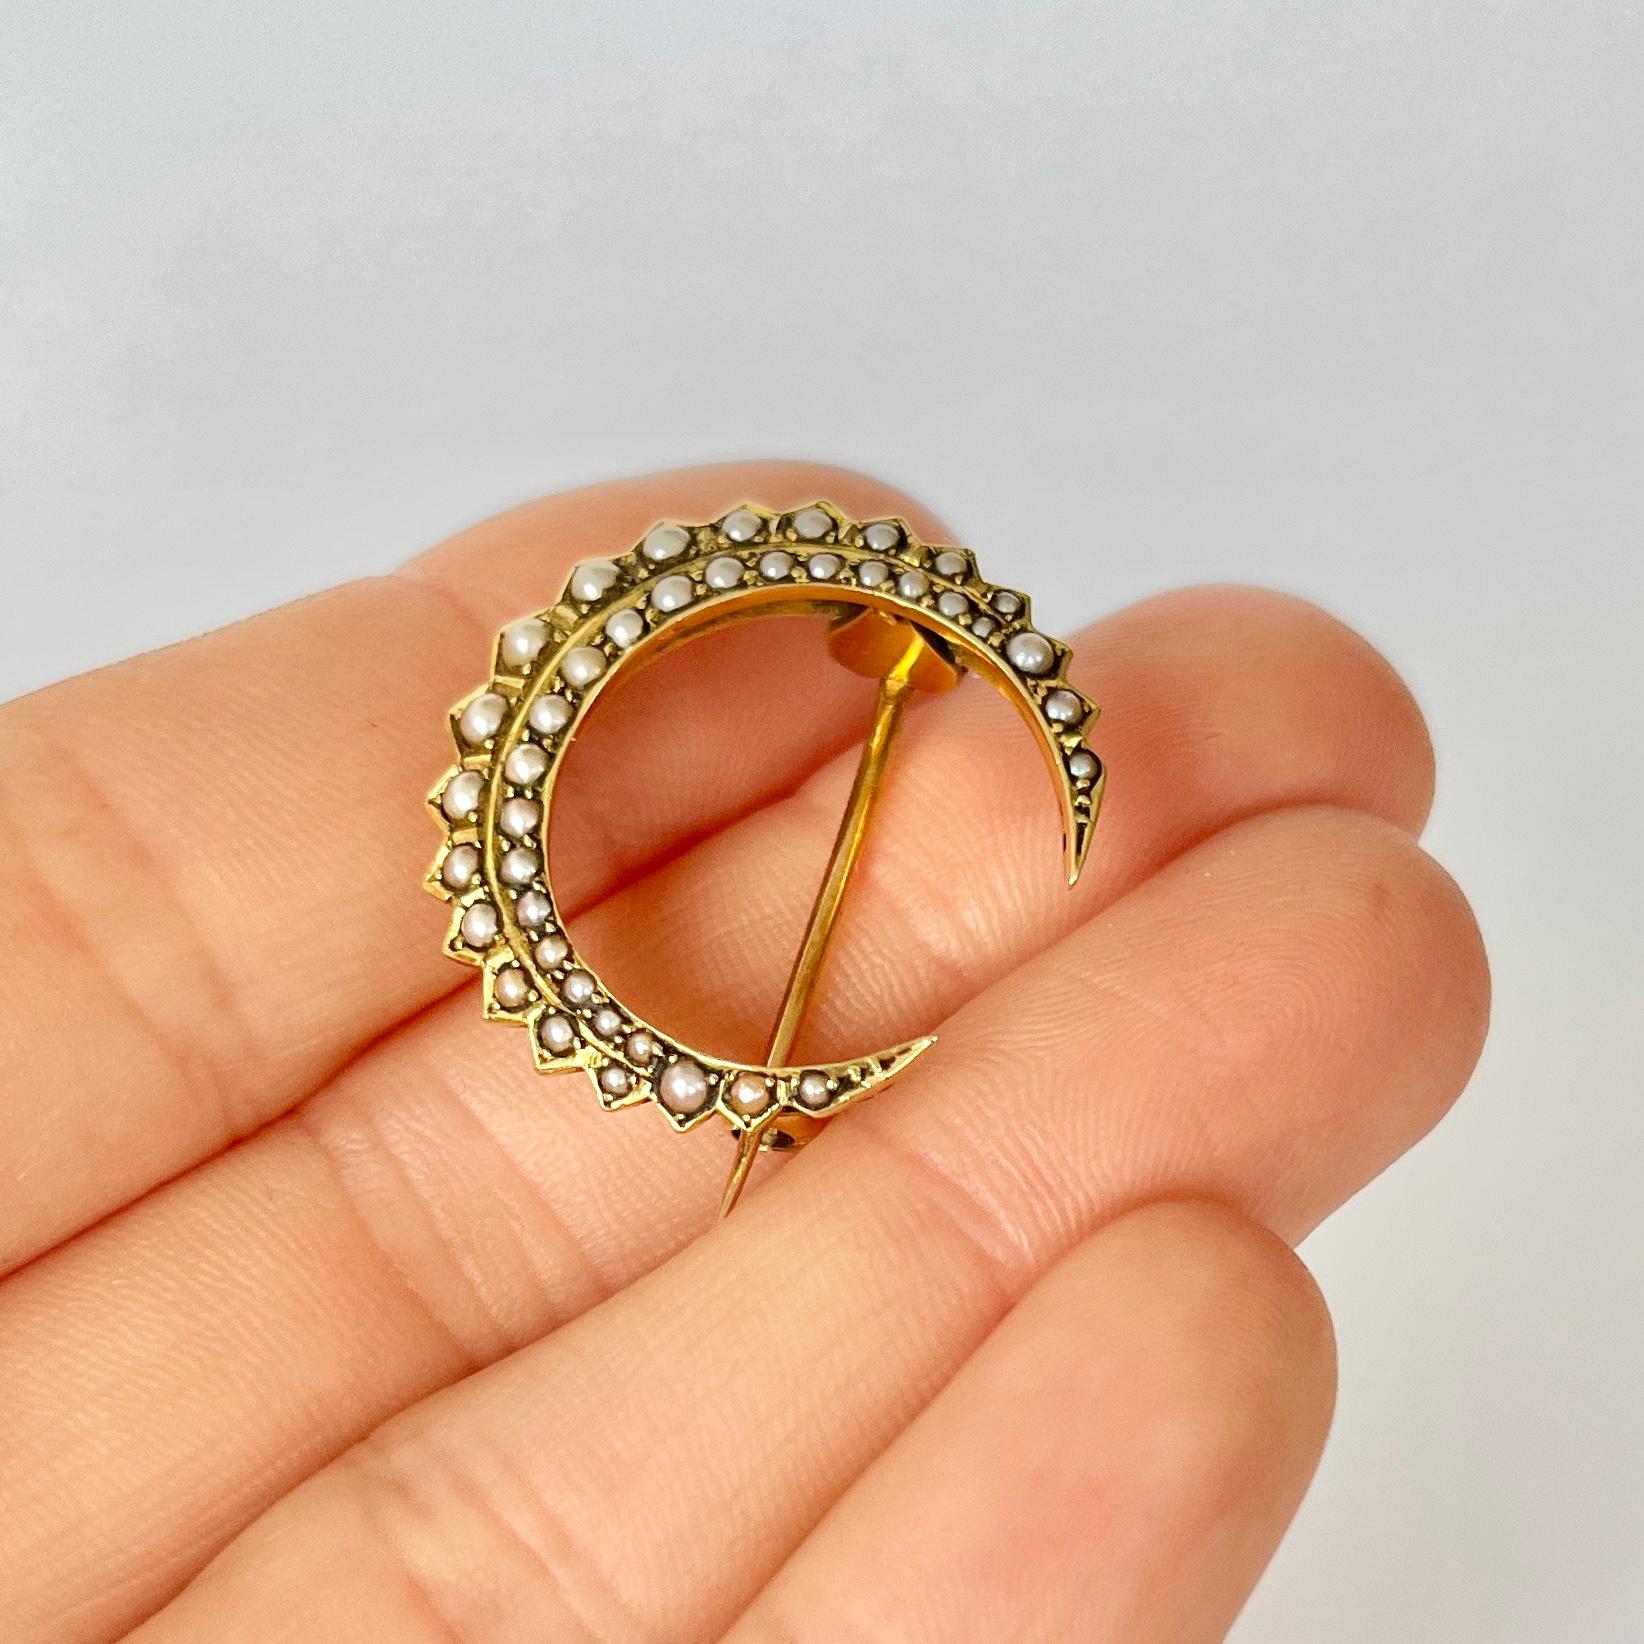 This fabulous crescent brooch has seed pearls set within the 9ct gold. I always like to mention that crescent brooches can be hooked onto a chain to make a gorgeous pendant. 

Crescent dimensions: 25x25mm 

Weight: 4.2g